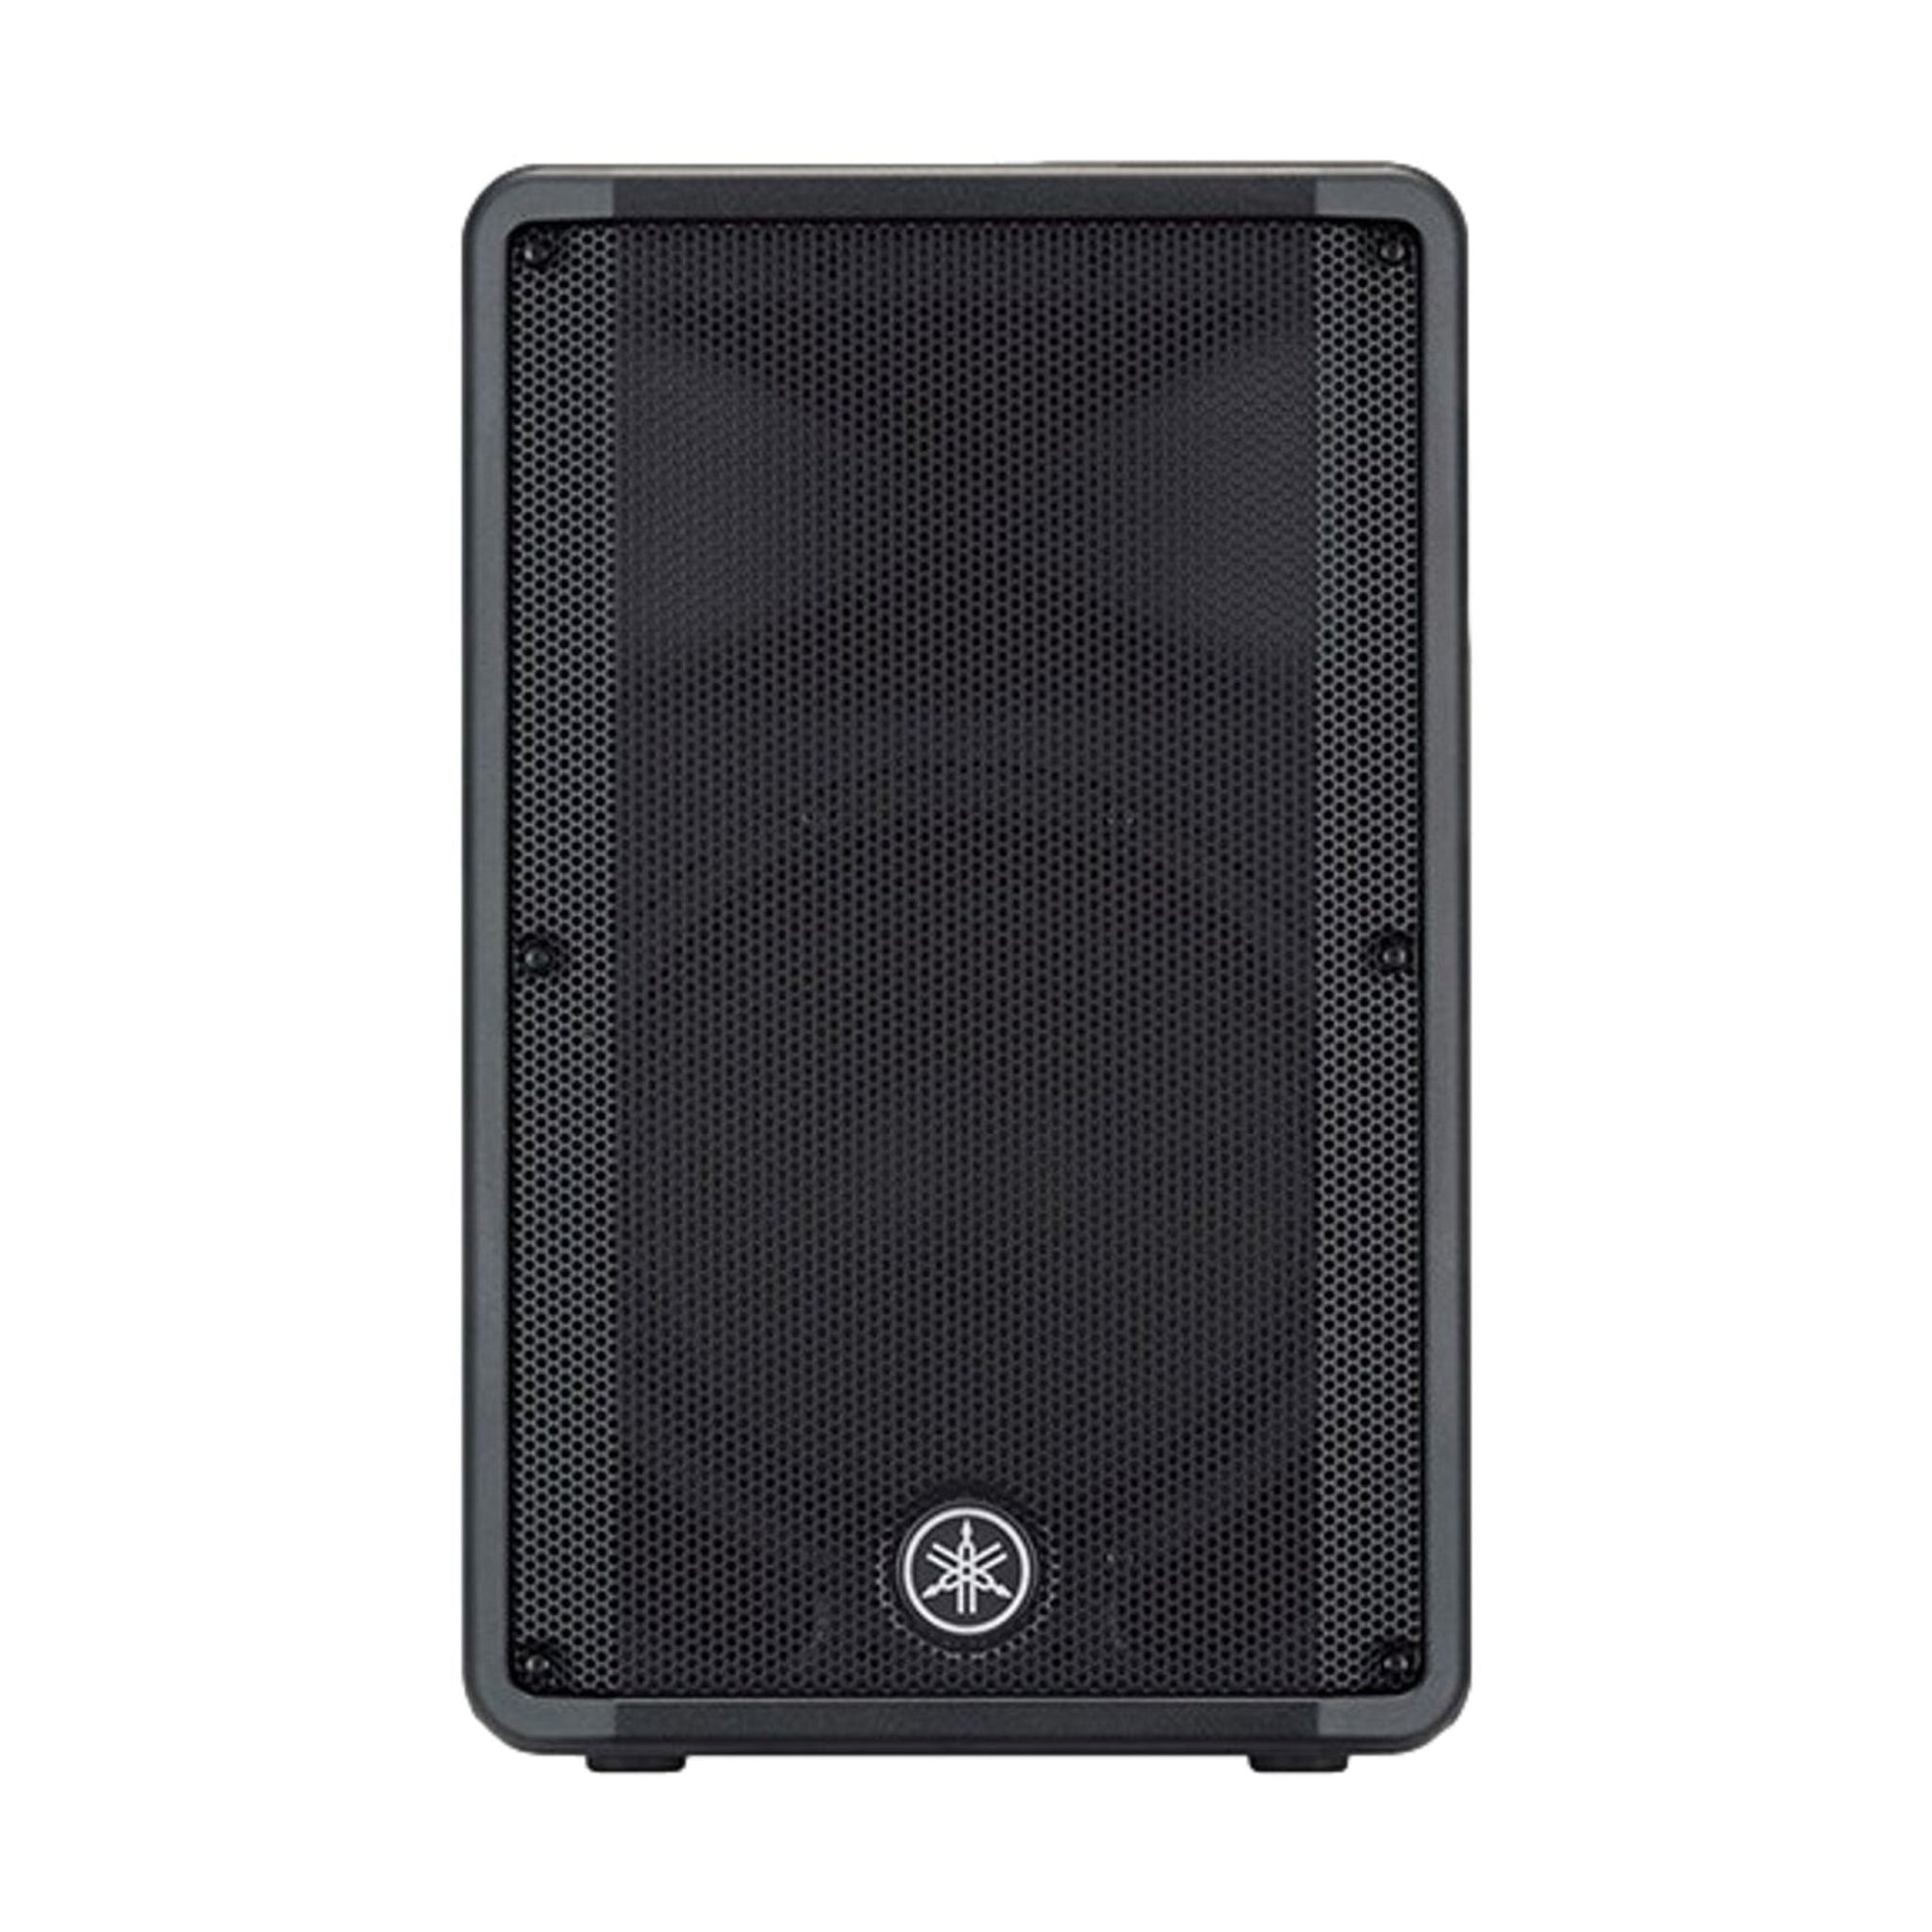 The Yamaha DBR12 Powered Speakers deliver powerful, high-quality sound with an unmatched economy of transport and setup time.